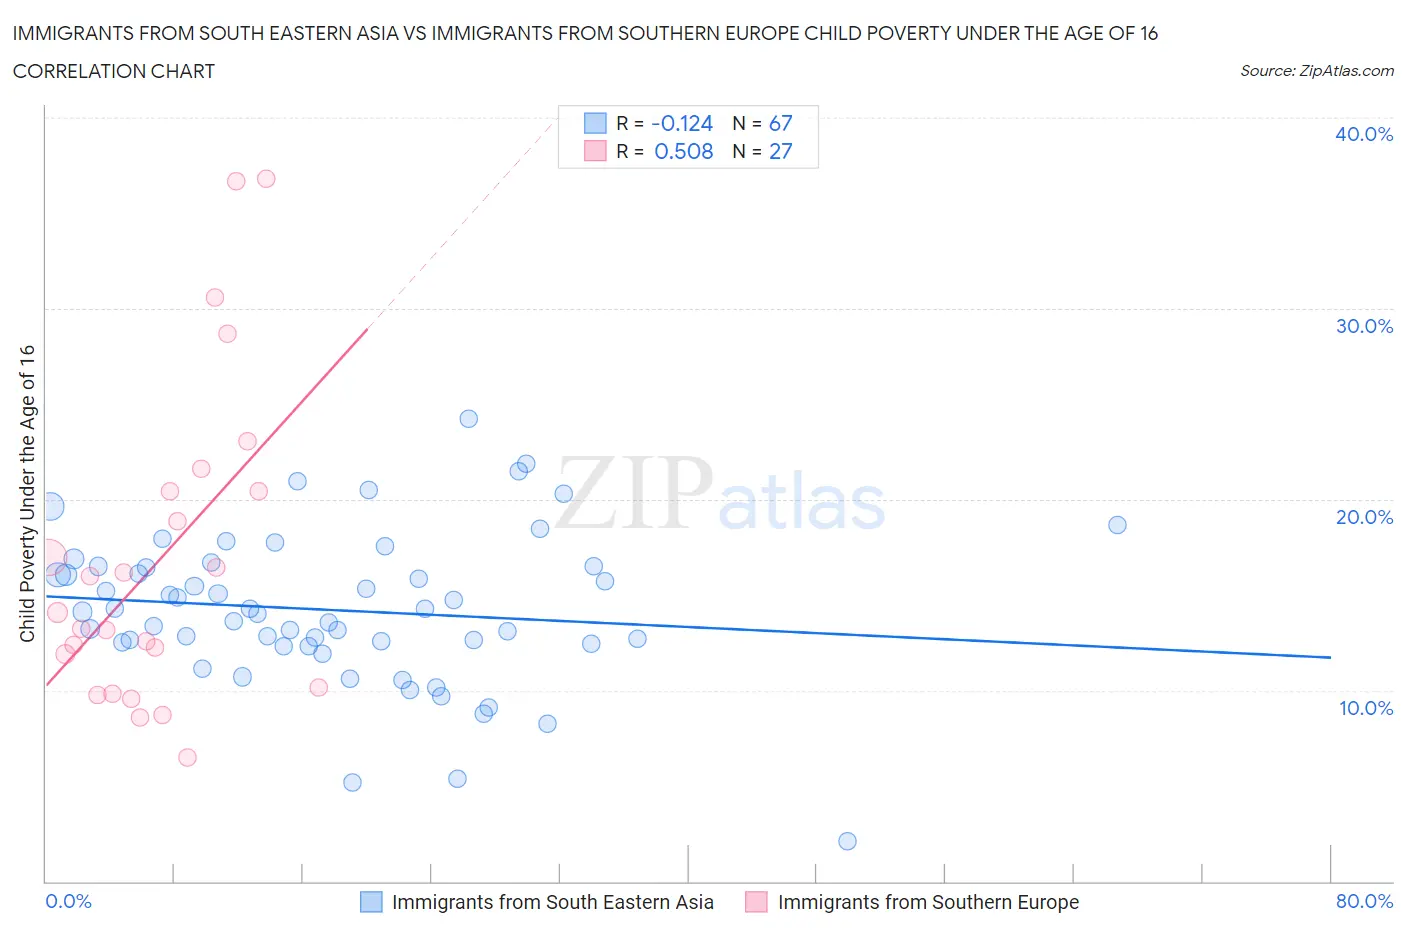 Immigrants from South Eastern Asia vs Immigrants from Southern Europe Child Poverty Under the Age of 16